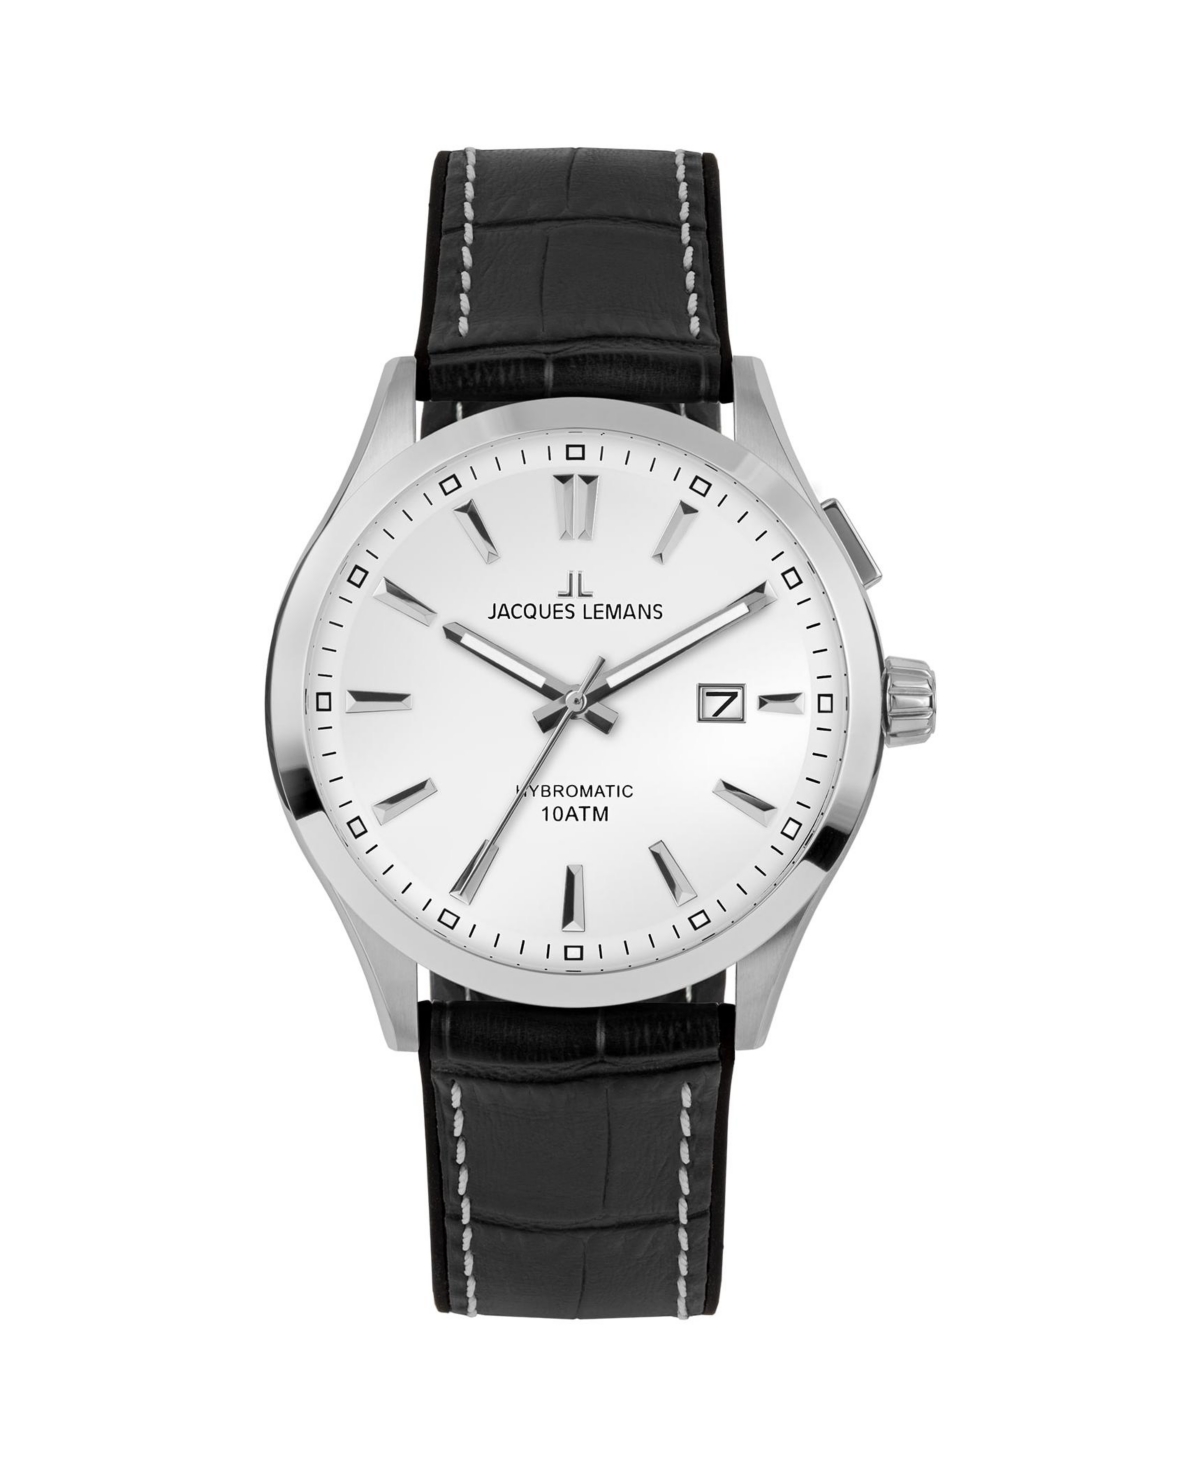 Jacques Lemans Men's Hybromatic Watch with Silicone/Leather Strap and Solid  Stainless Steel 1-2130 - White | Smart Closet